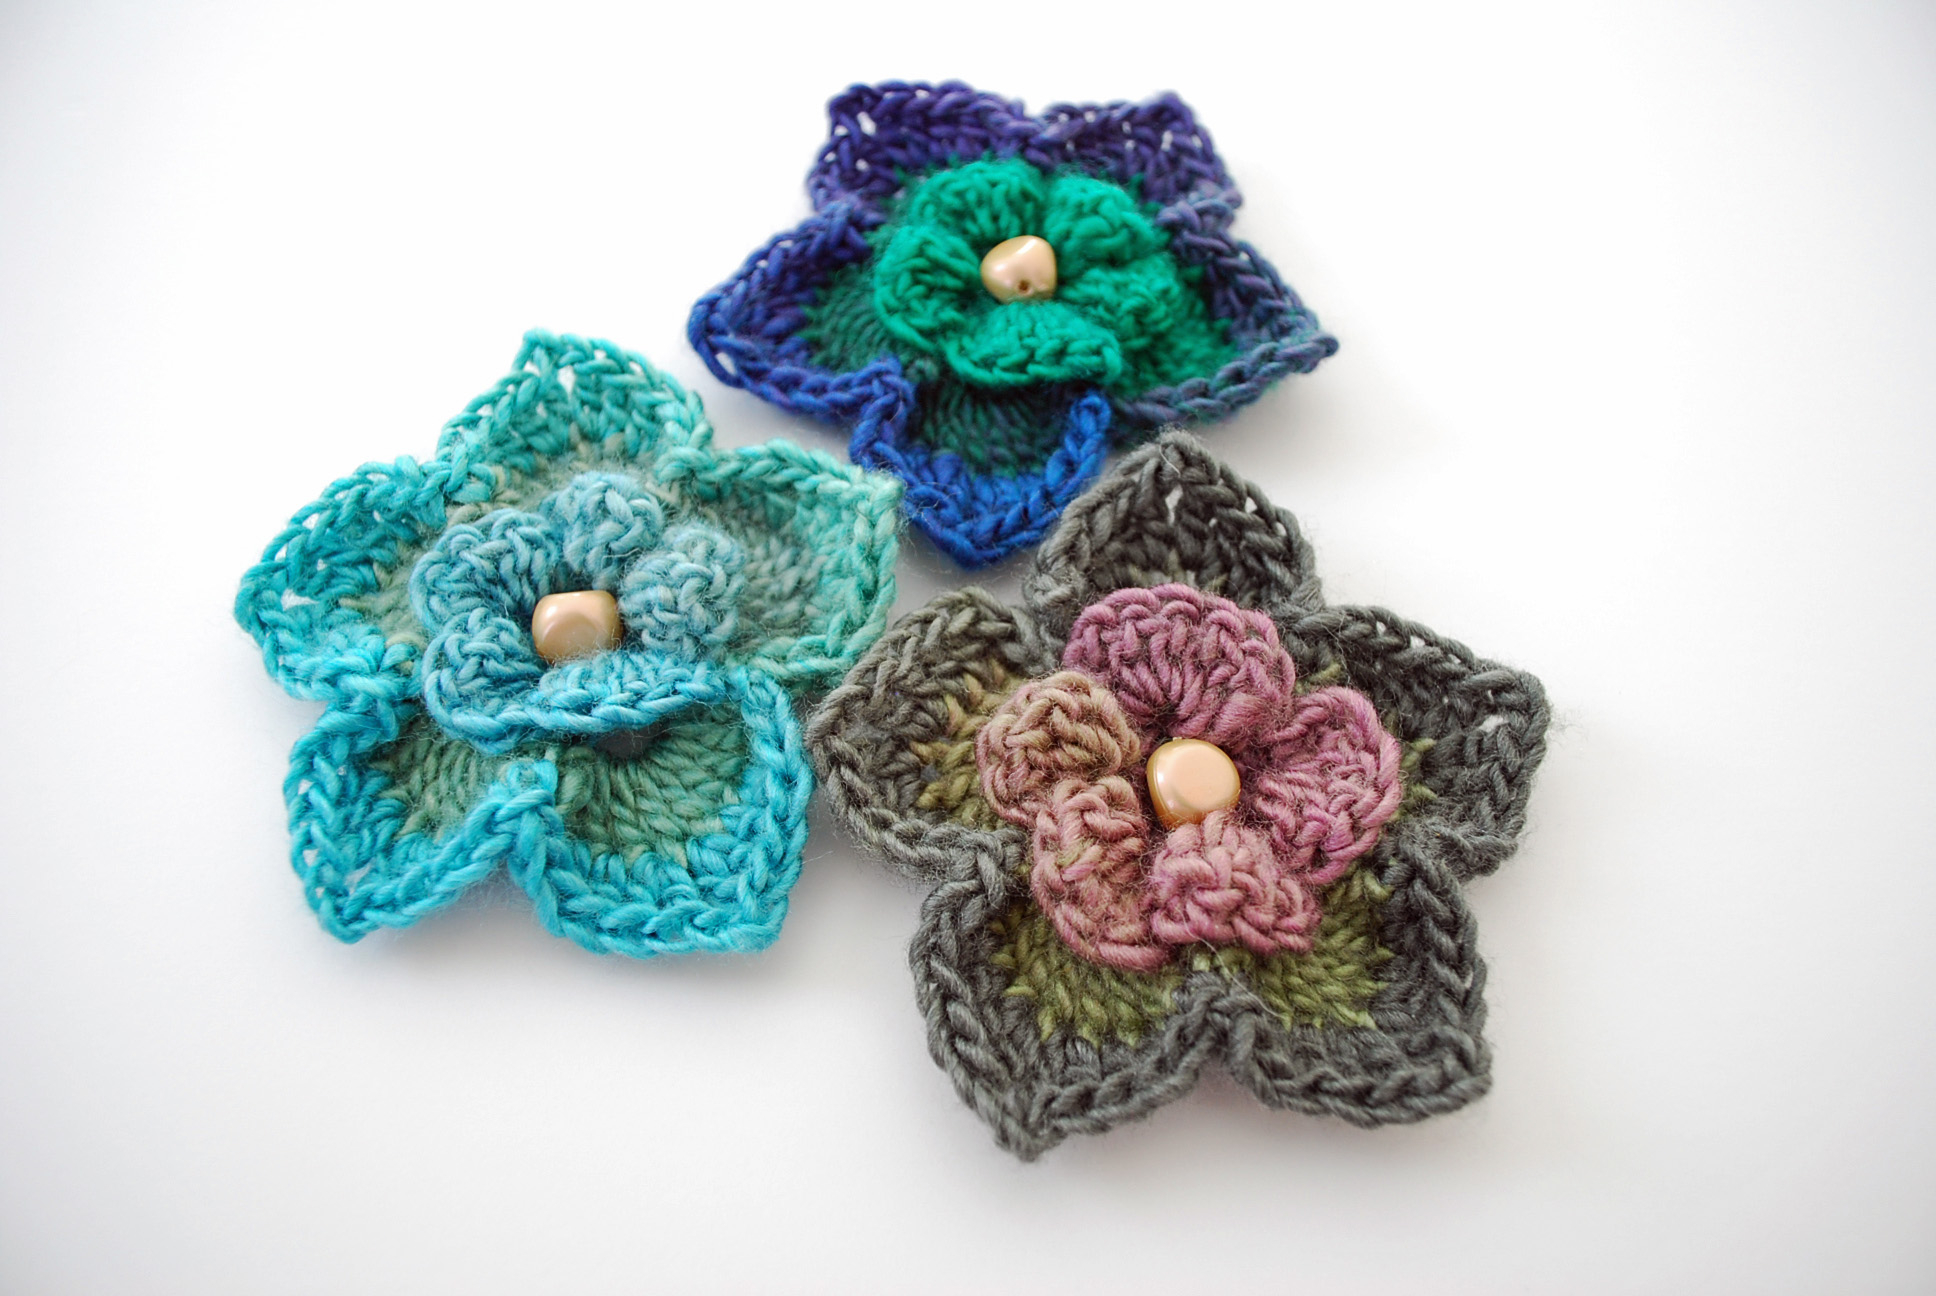 Crochet Flowers Pattern Different Types Of Free Crochet Flower Patterns Crochet And